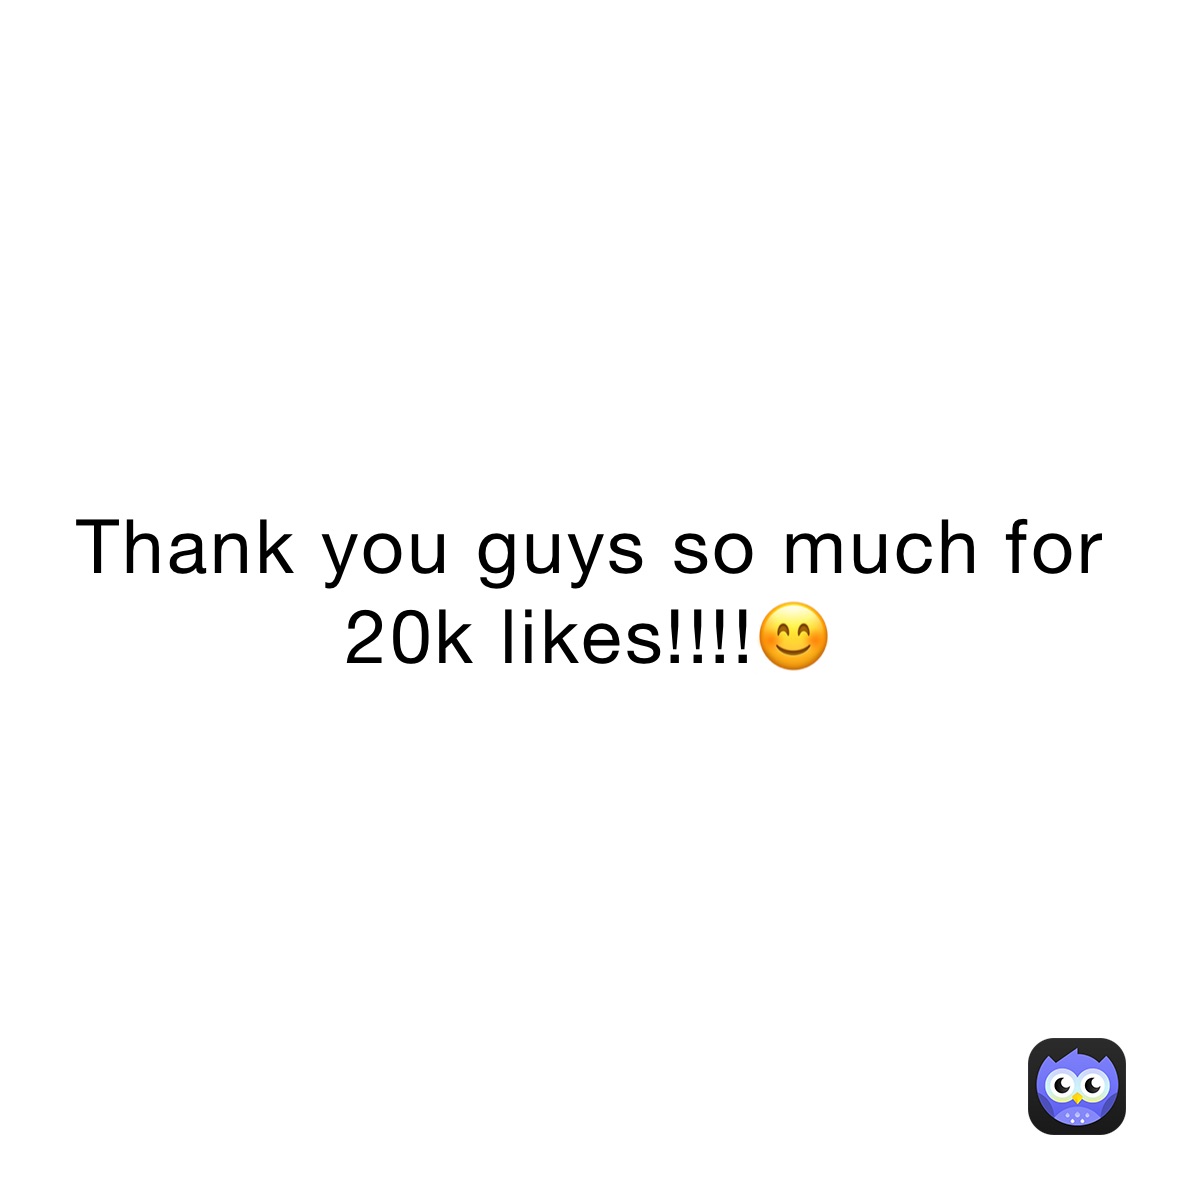 Thank you guys so much for 20k likes!!!!😊